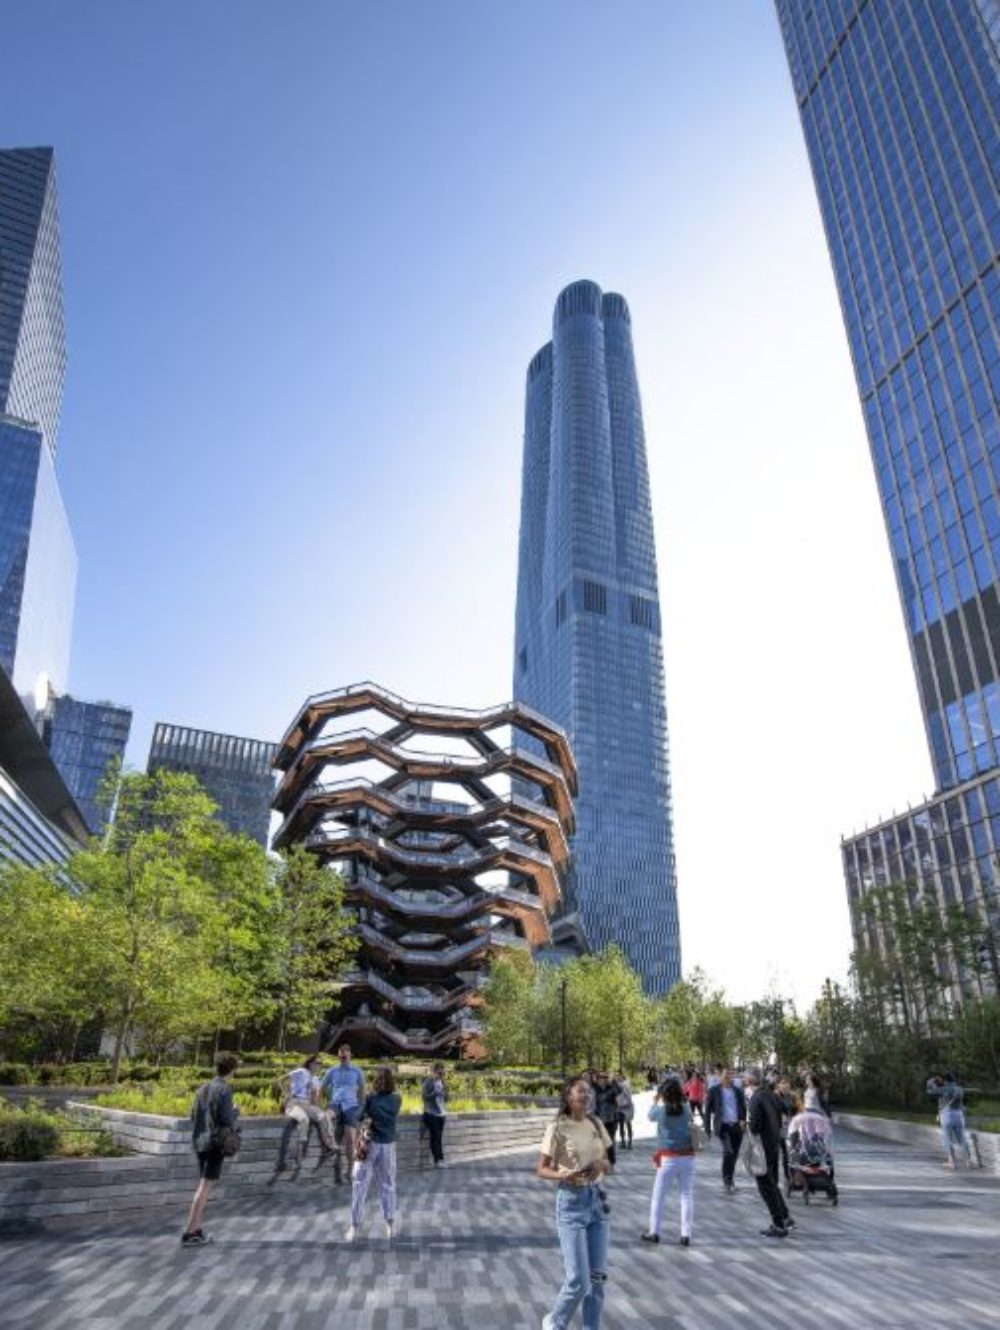 Ground view of 15 Hudson Yards condominiums in New York City. Includes glass walkway structure and people in the street.